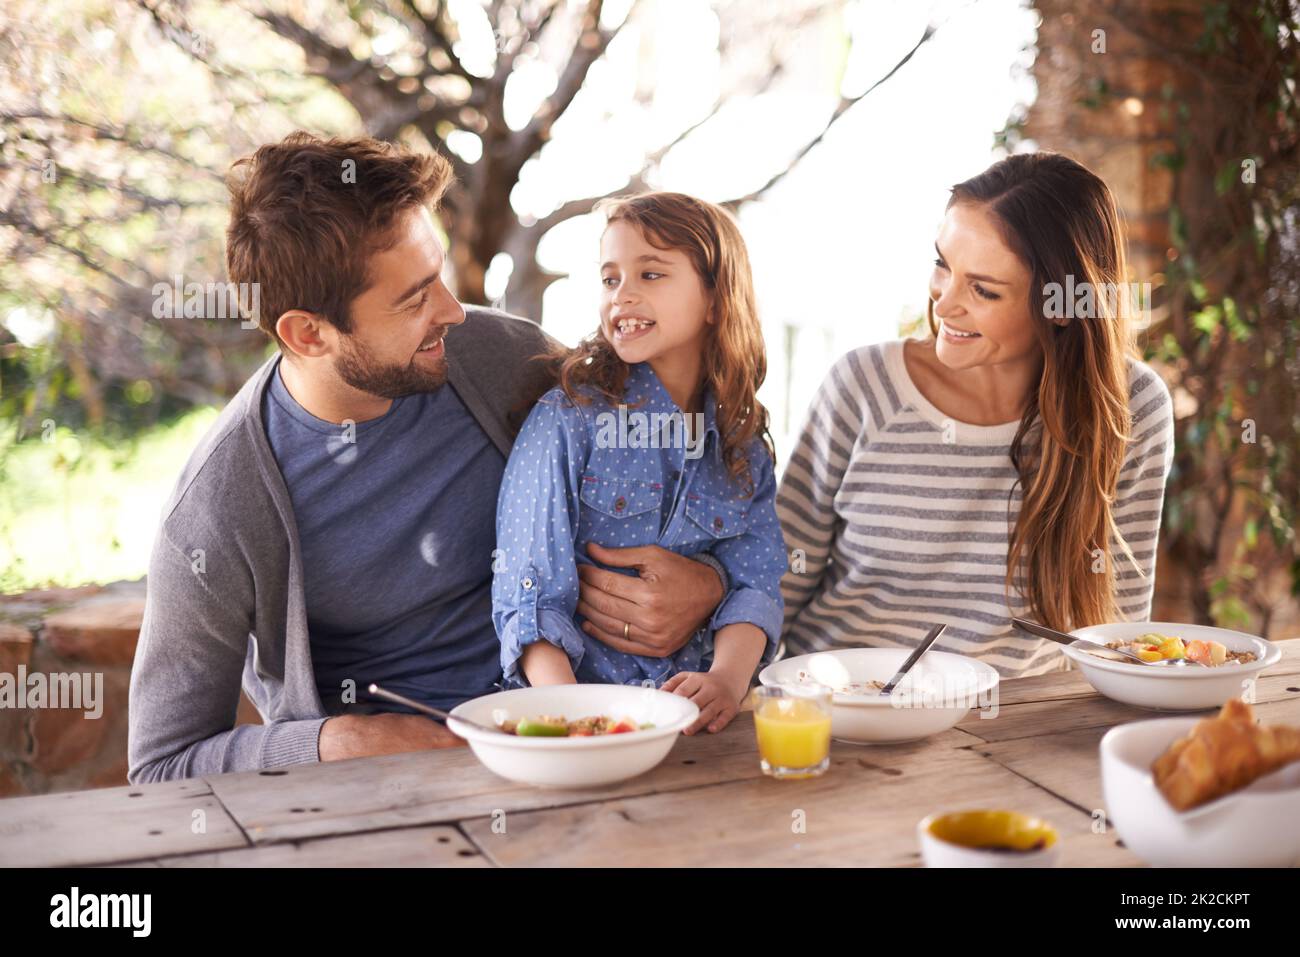 Delightful breakfast time. Cropped shot of a family having a meal together outside. Stock Photo